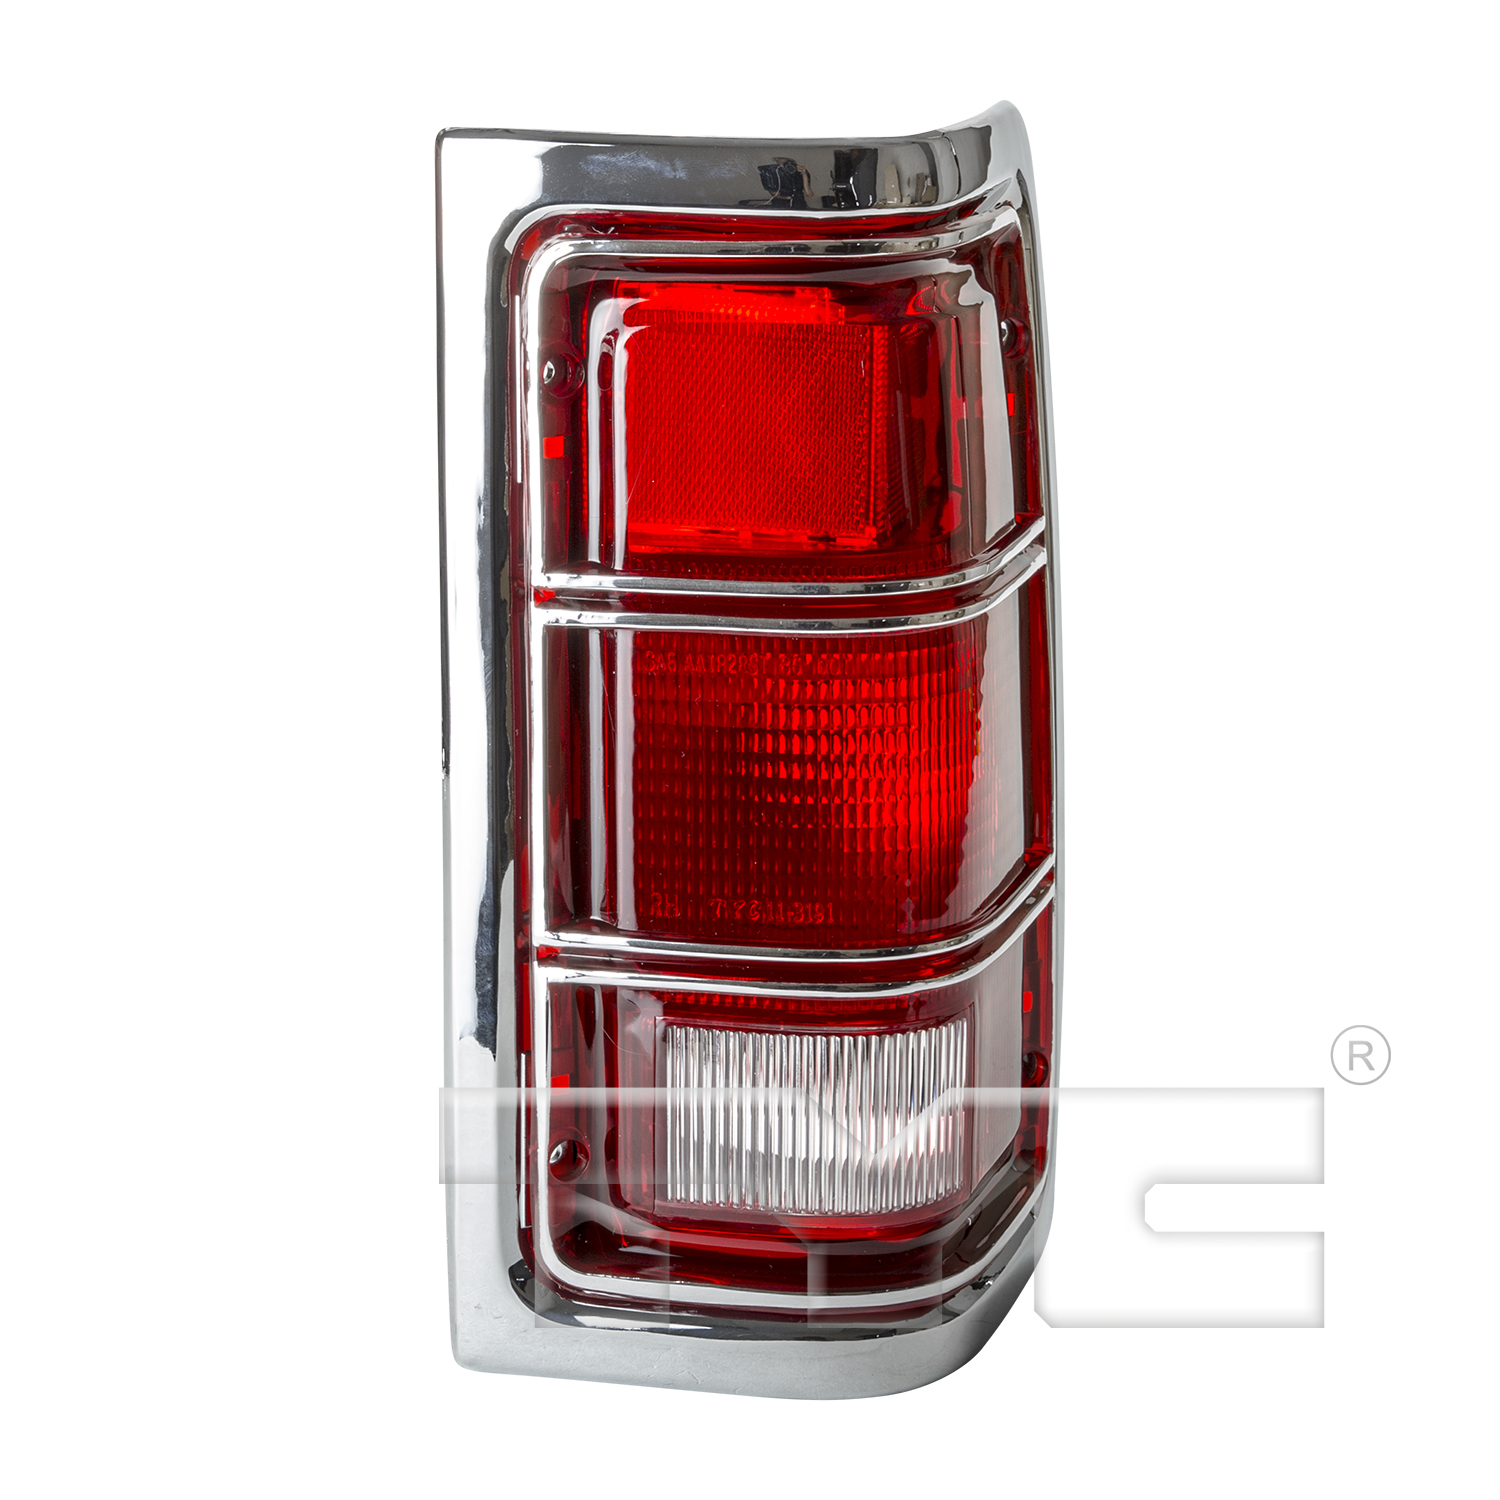 Aftermarket TAILLIGHTS for DODGE - W250, W250,81-87,RT Taillamp lens